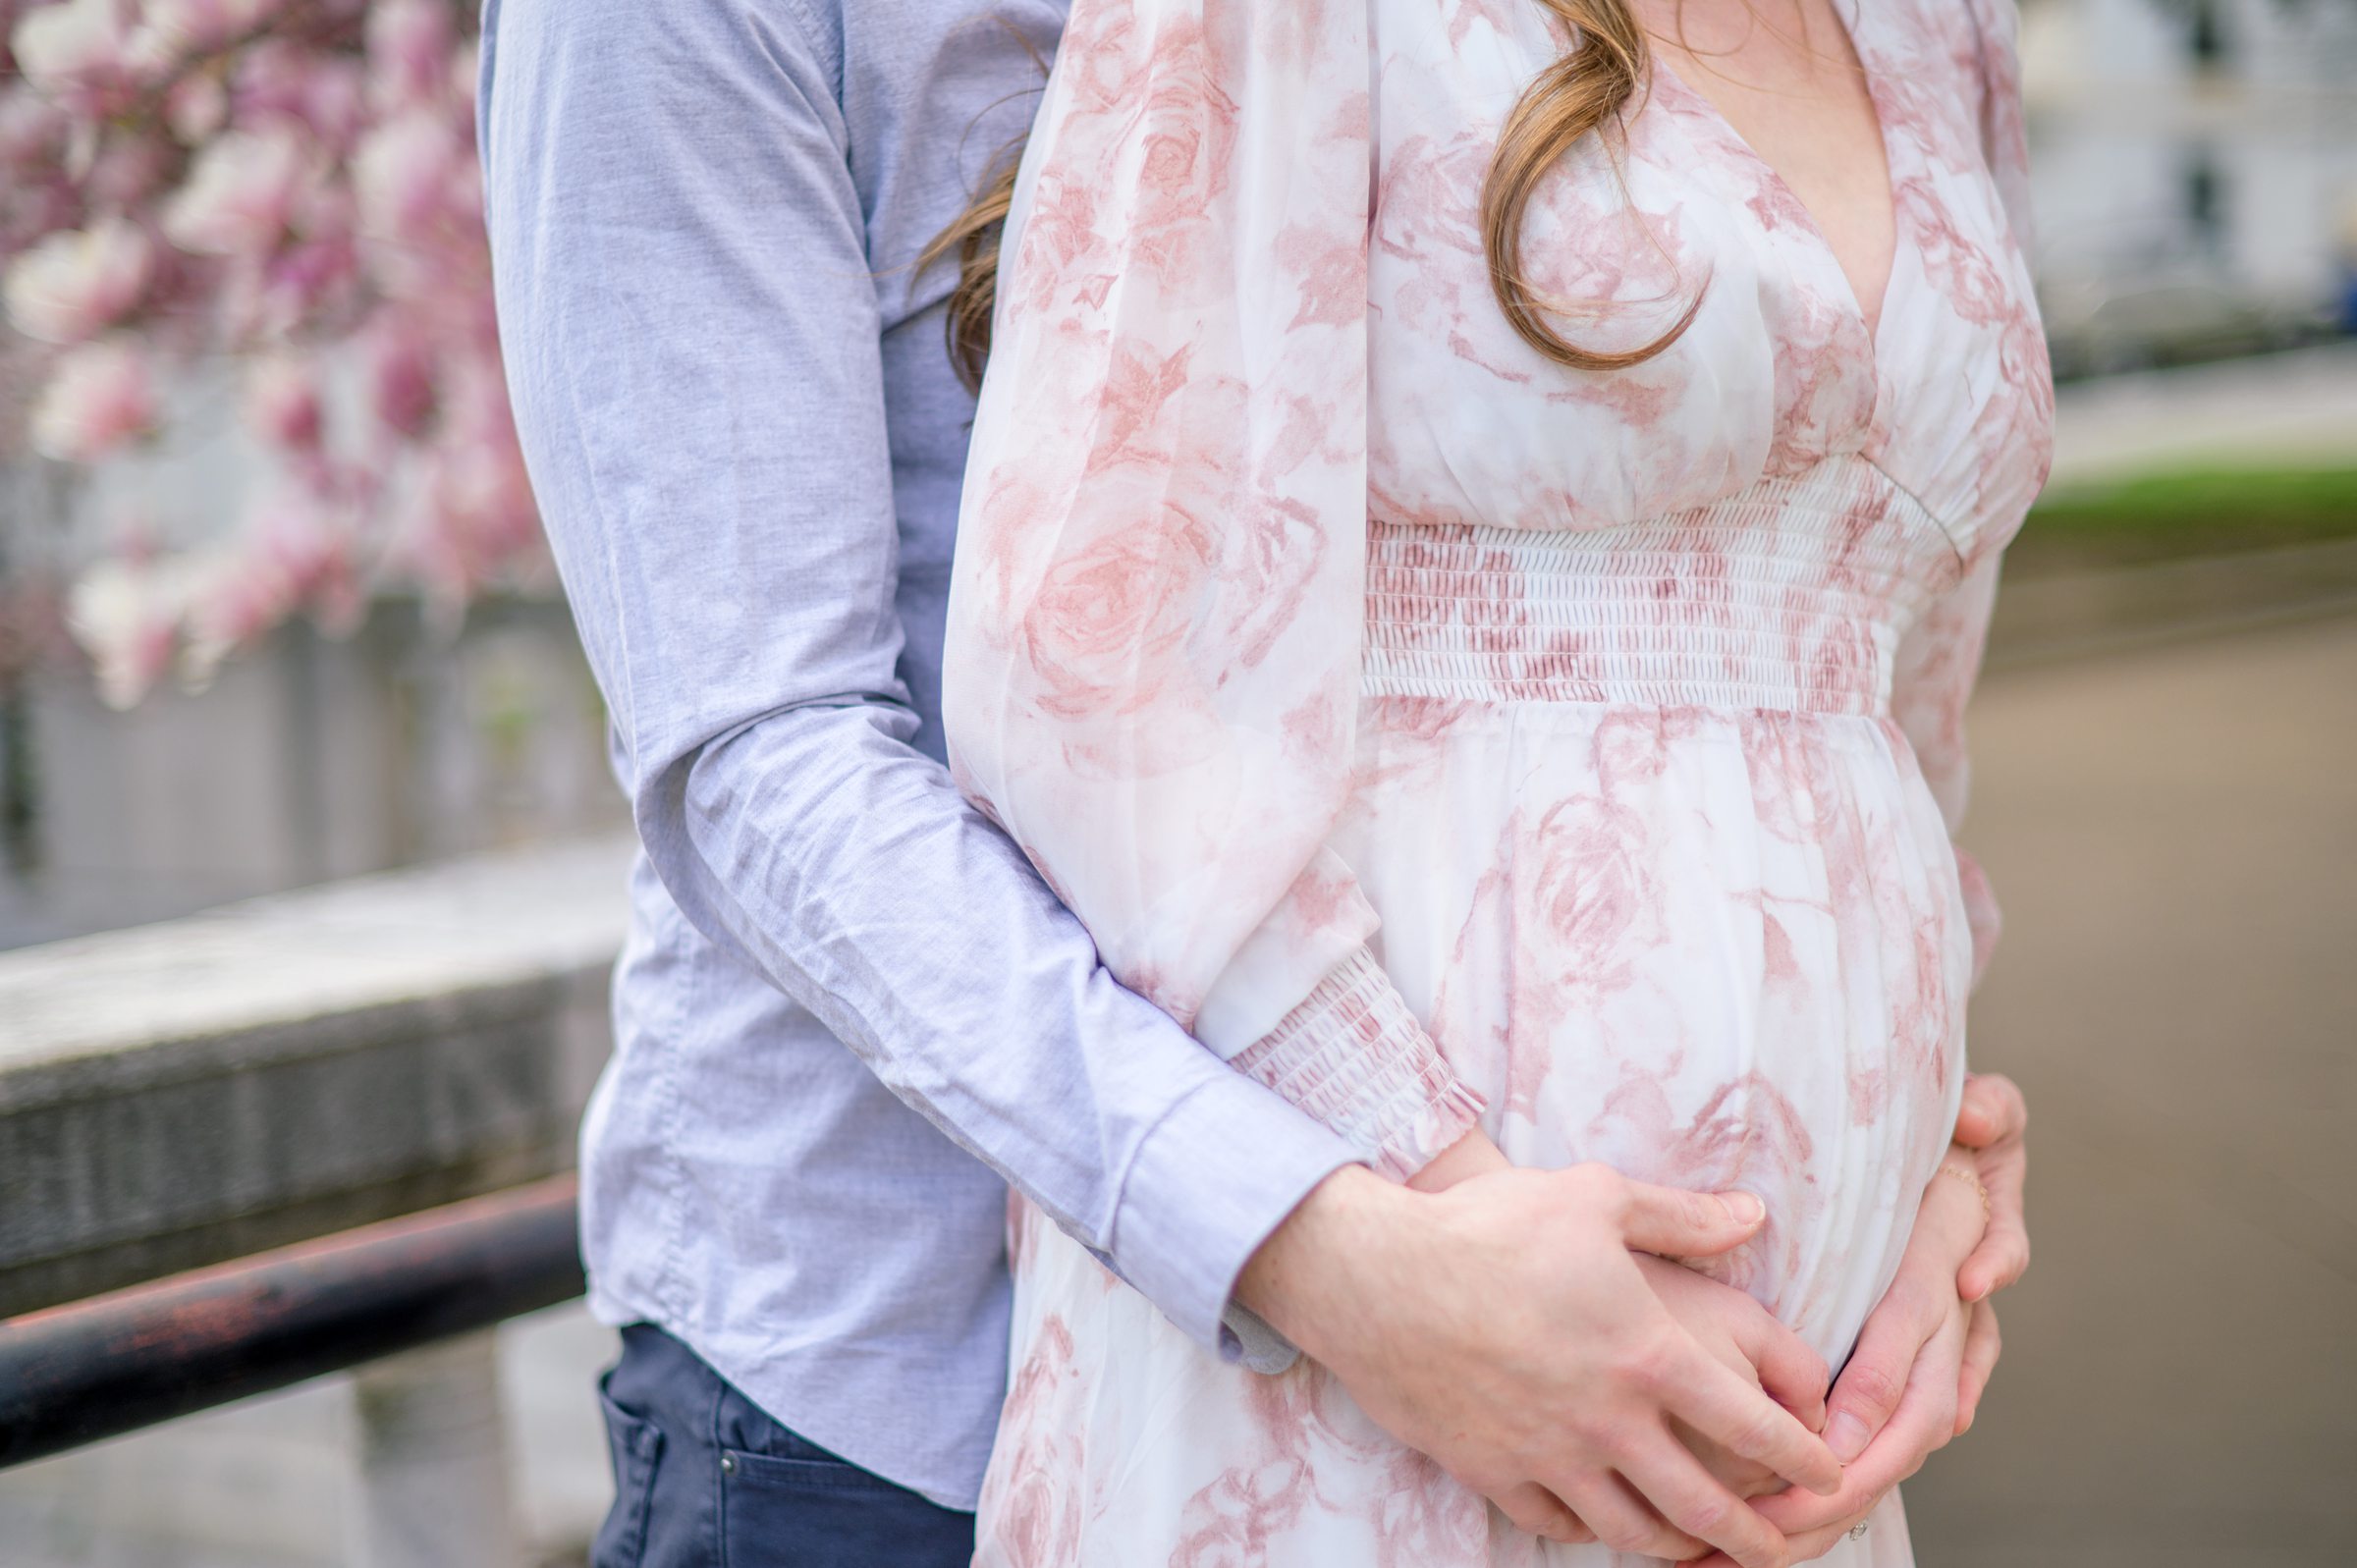 Meg and Sean's maternity photos in Baltimore featuring stunning pink magnolia trees by Baltimore Photographer Cait Kramer Photography